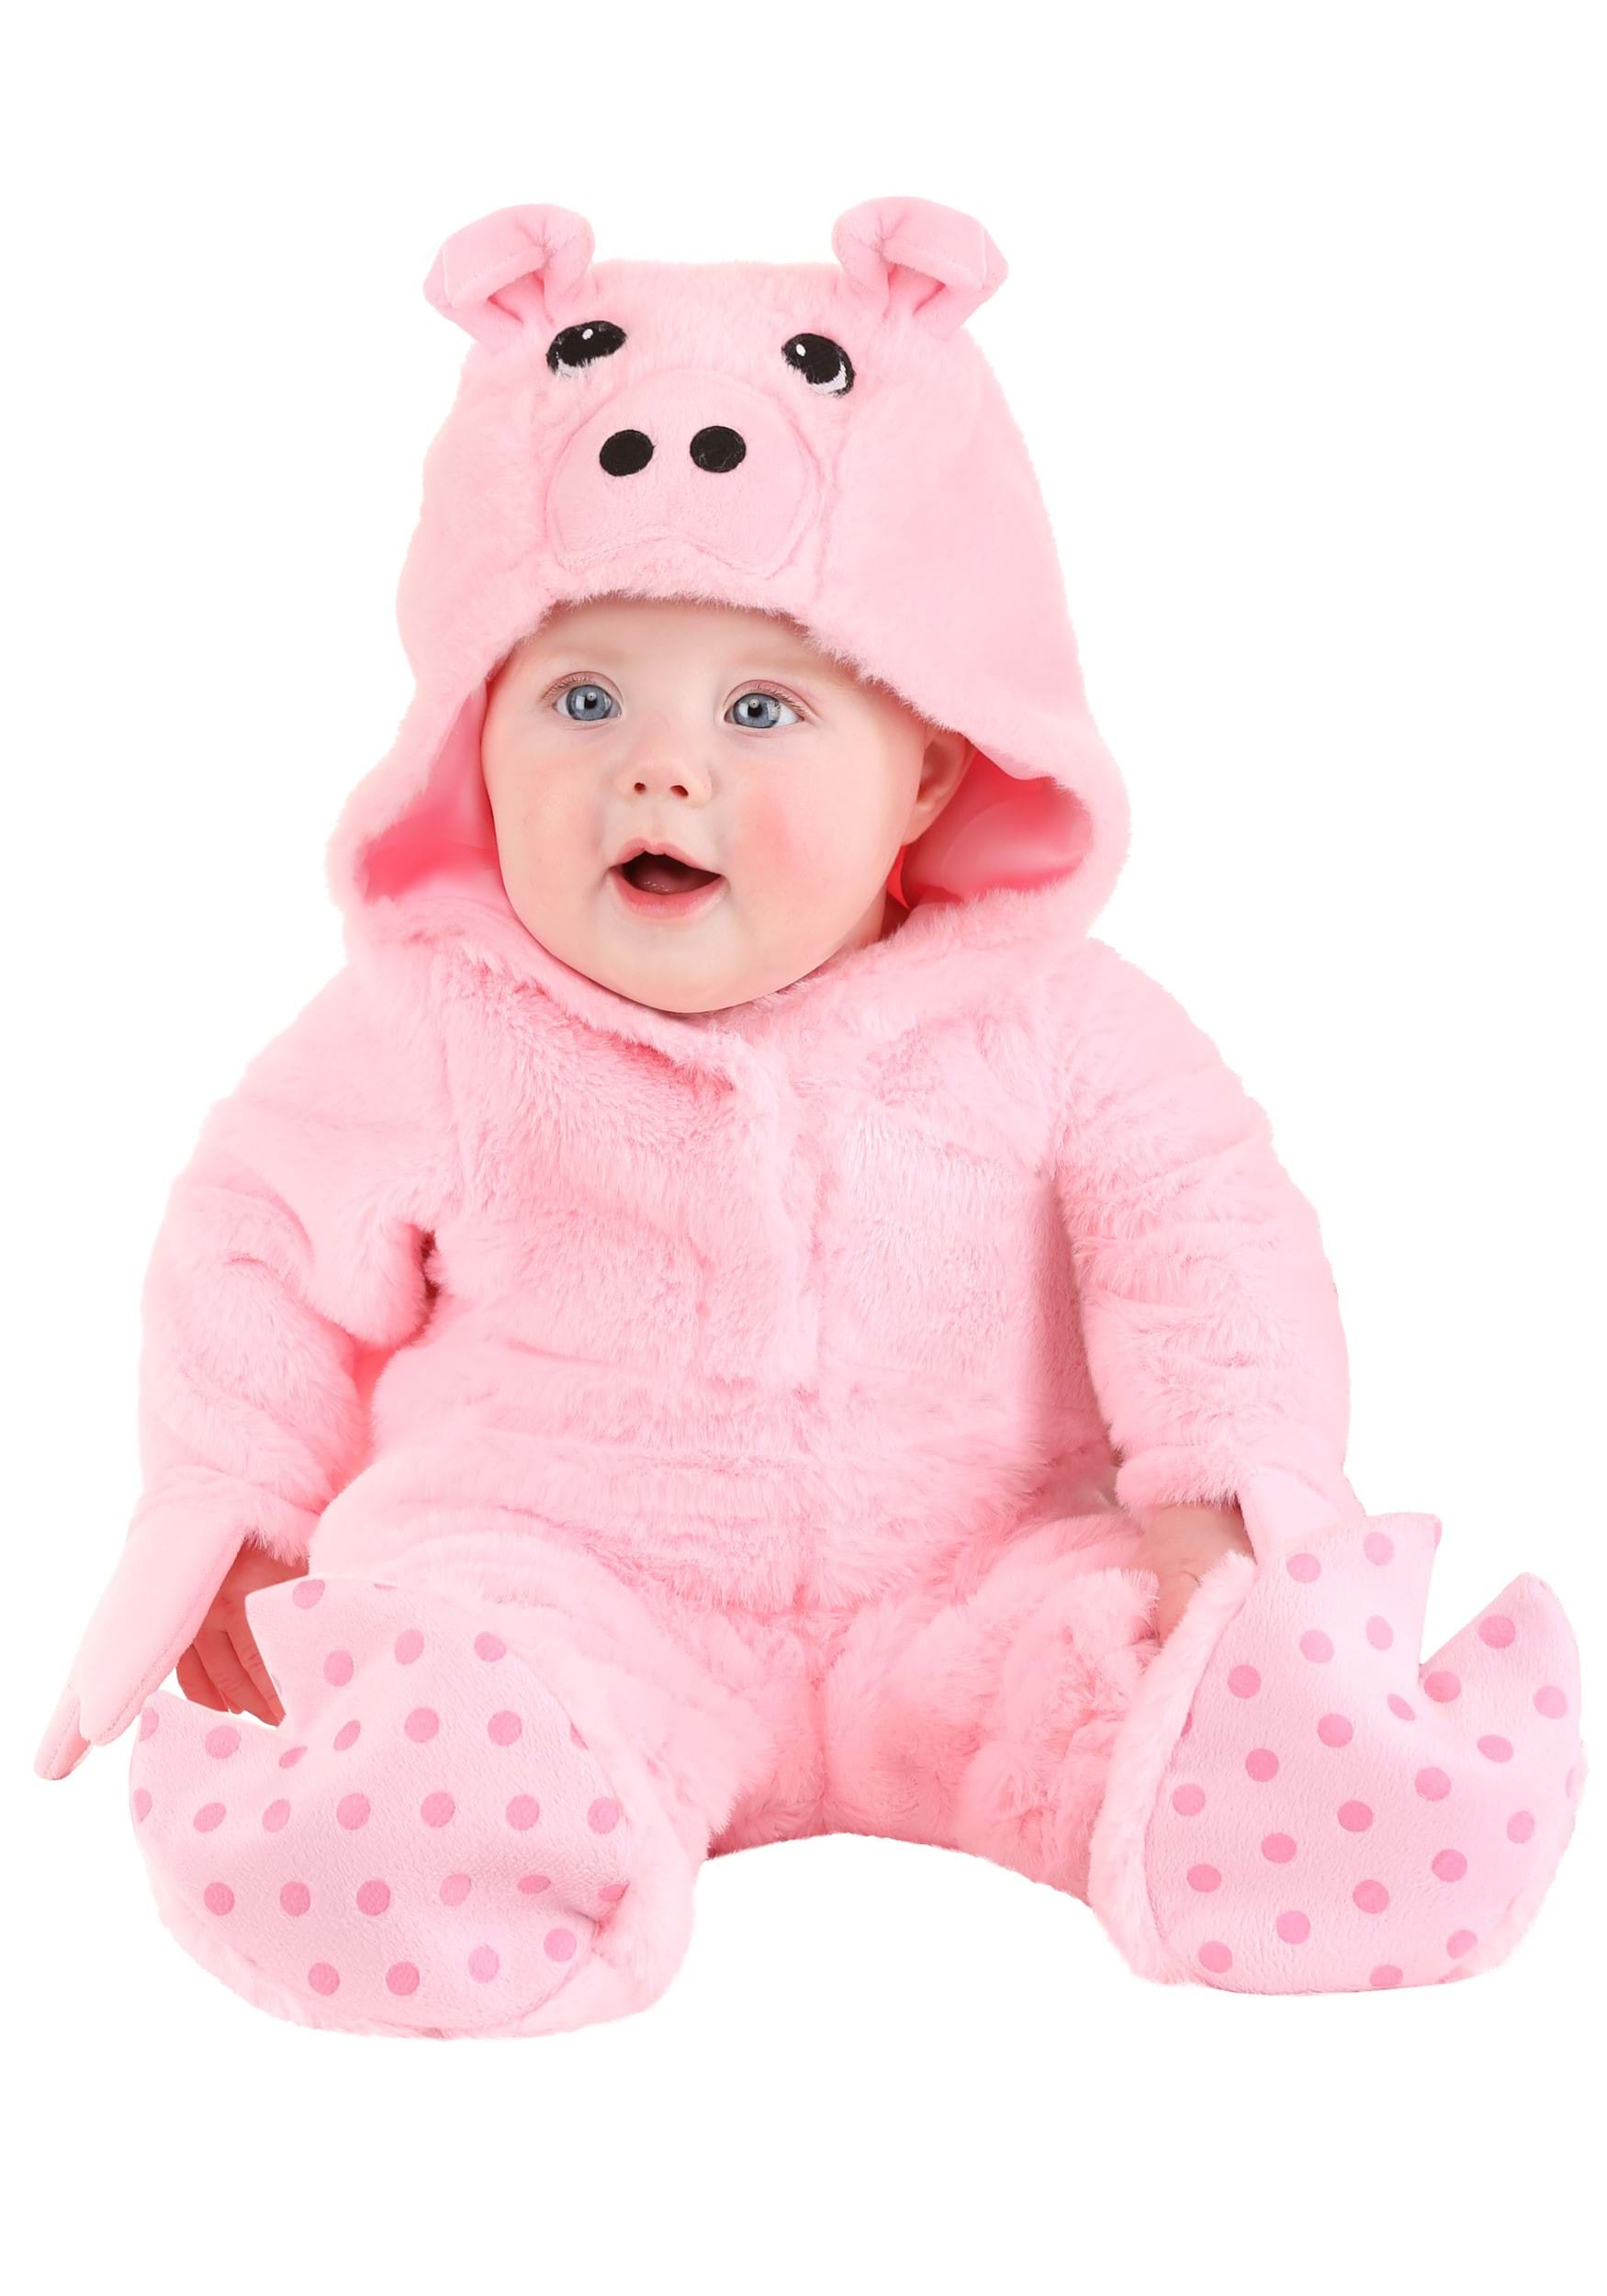 Photos - Fancy Dress FUN Costumes Snuggly Pig Infant Costume Pink FUN1570IN